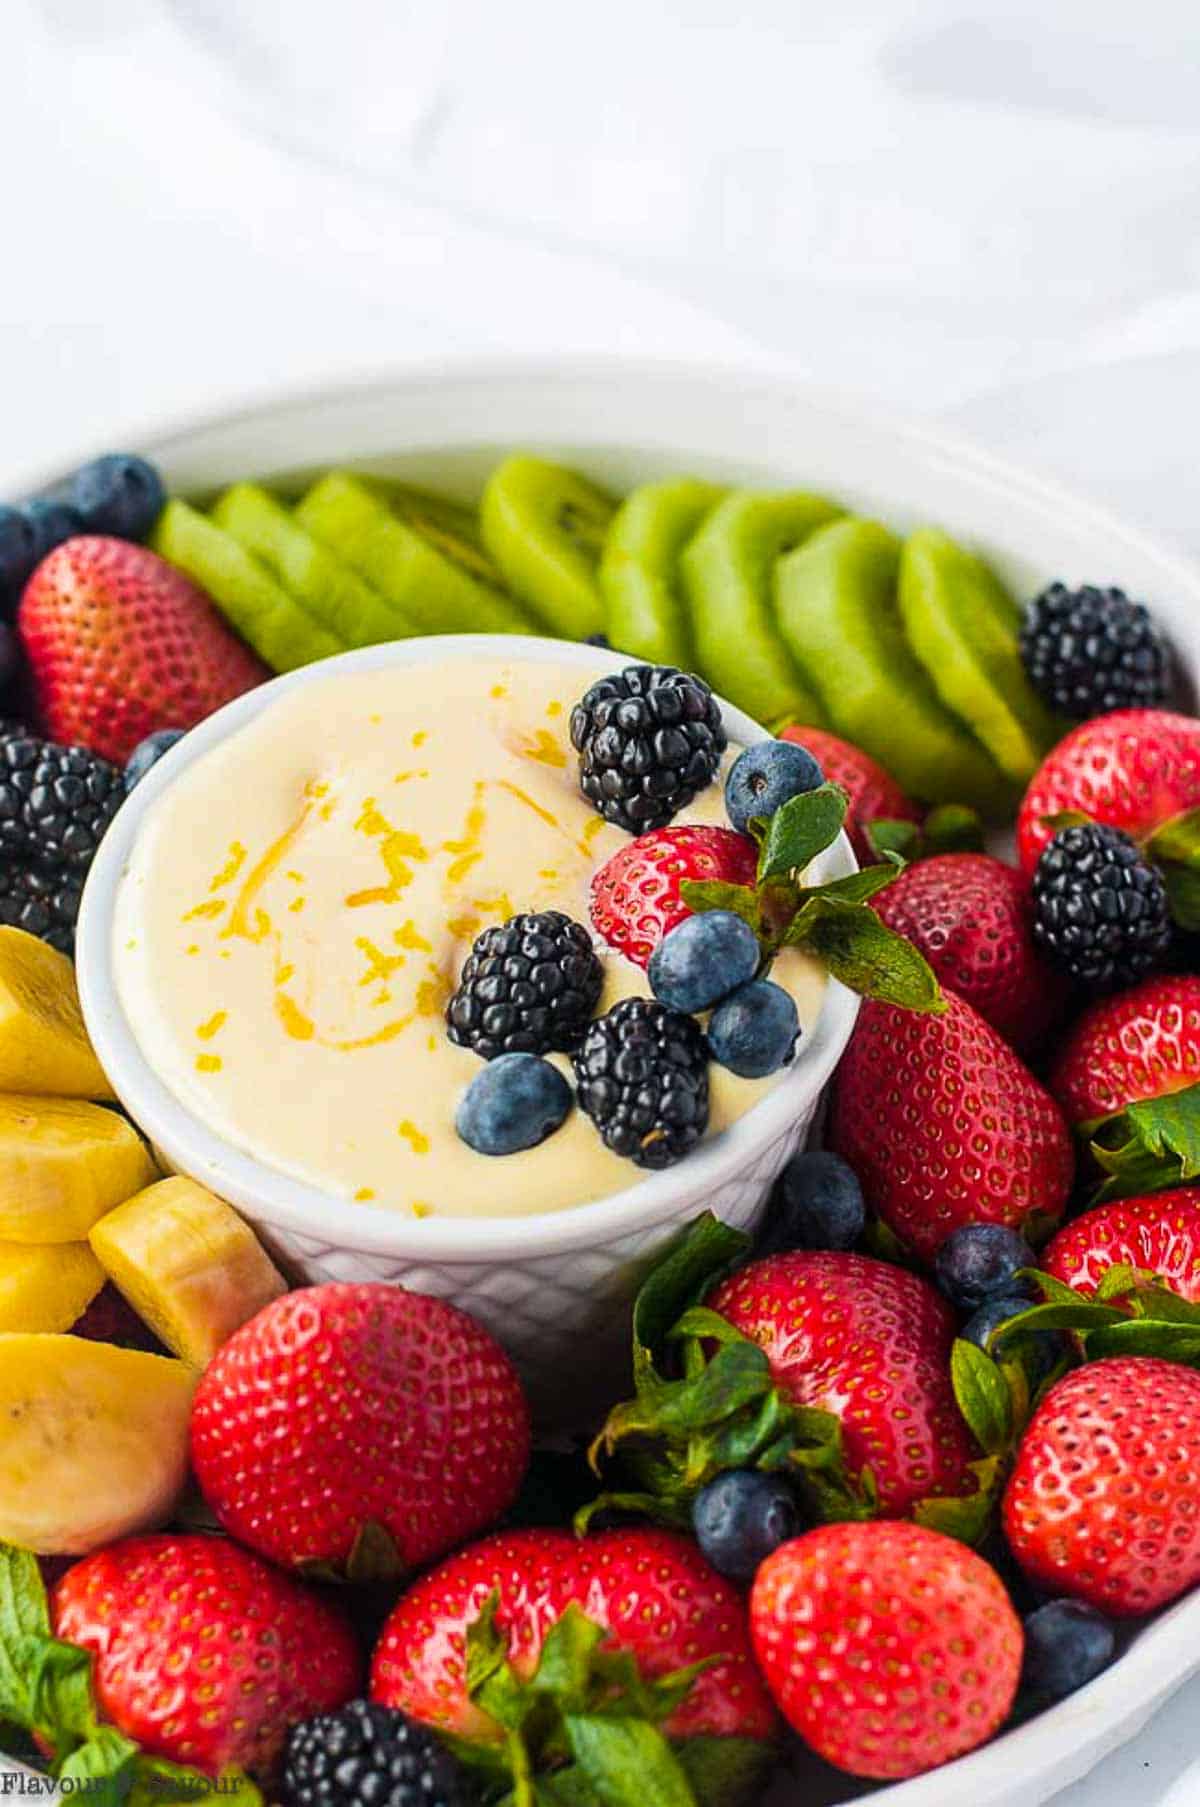 Berries, kiwi and banana slices with a bowl of lemon curd fruit dip.